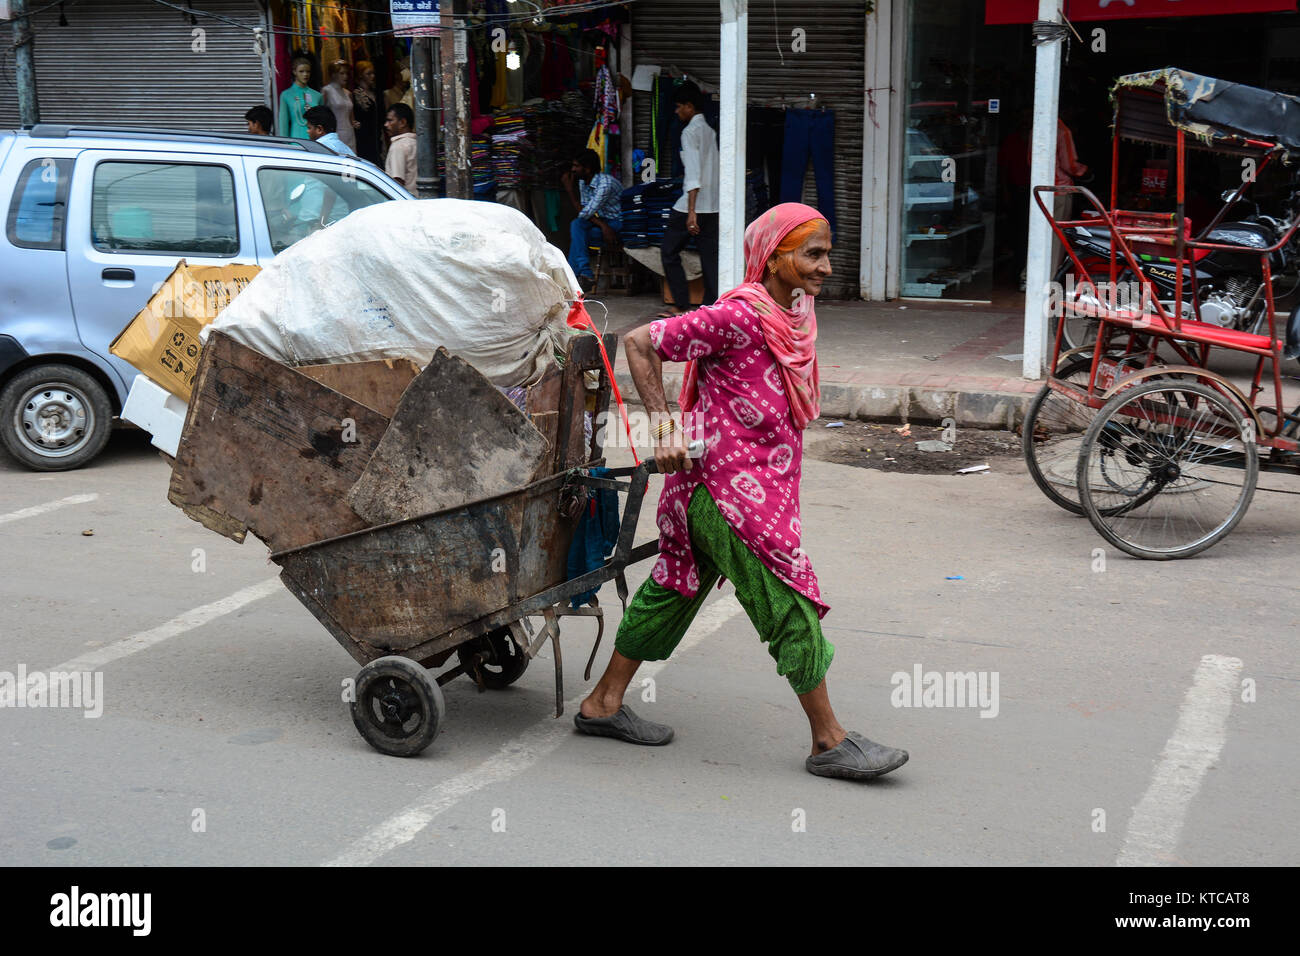 Delhi, India - Jul 26, 2015. A woman carrying goods at the old market in Delhi, India. According to the 2011 census of India, the population of Delhi  Stock Photo